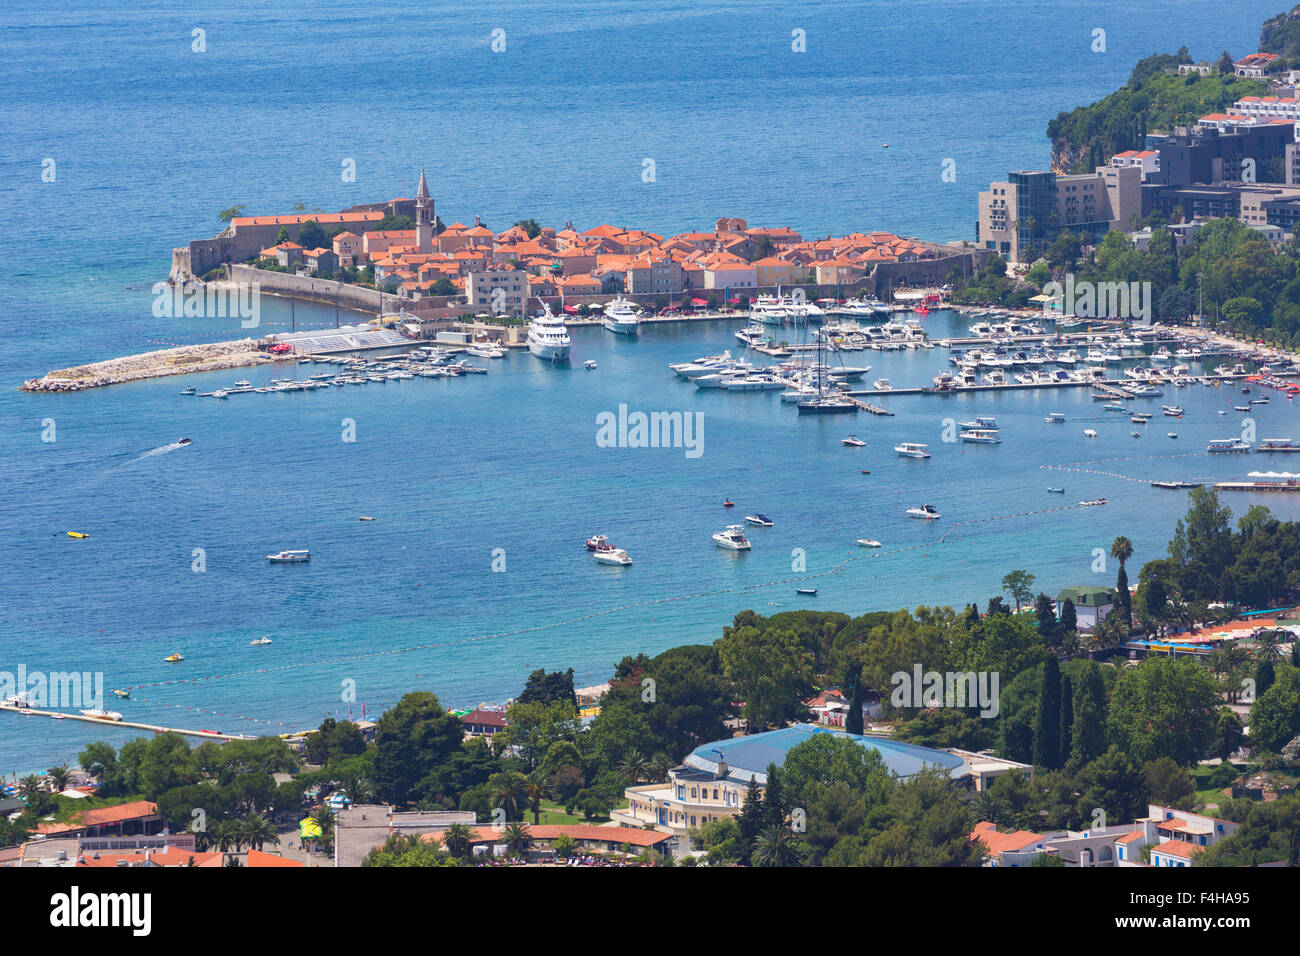 Budva, Montenegro. Overall view of Old Town. Stock Photo